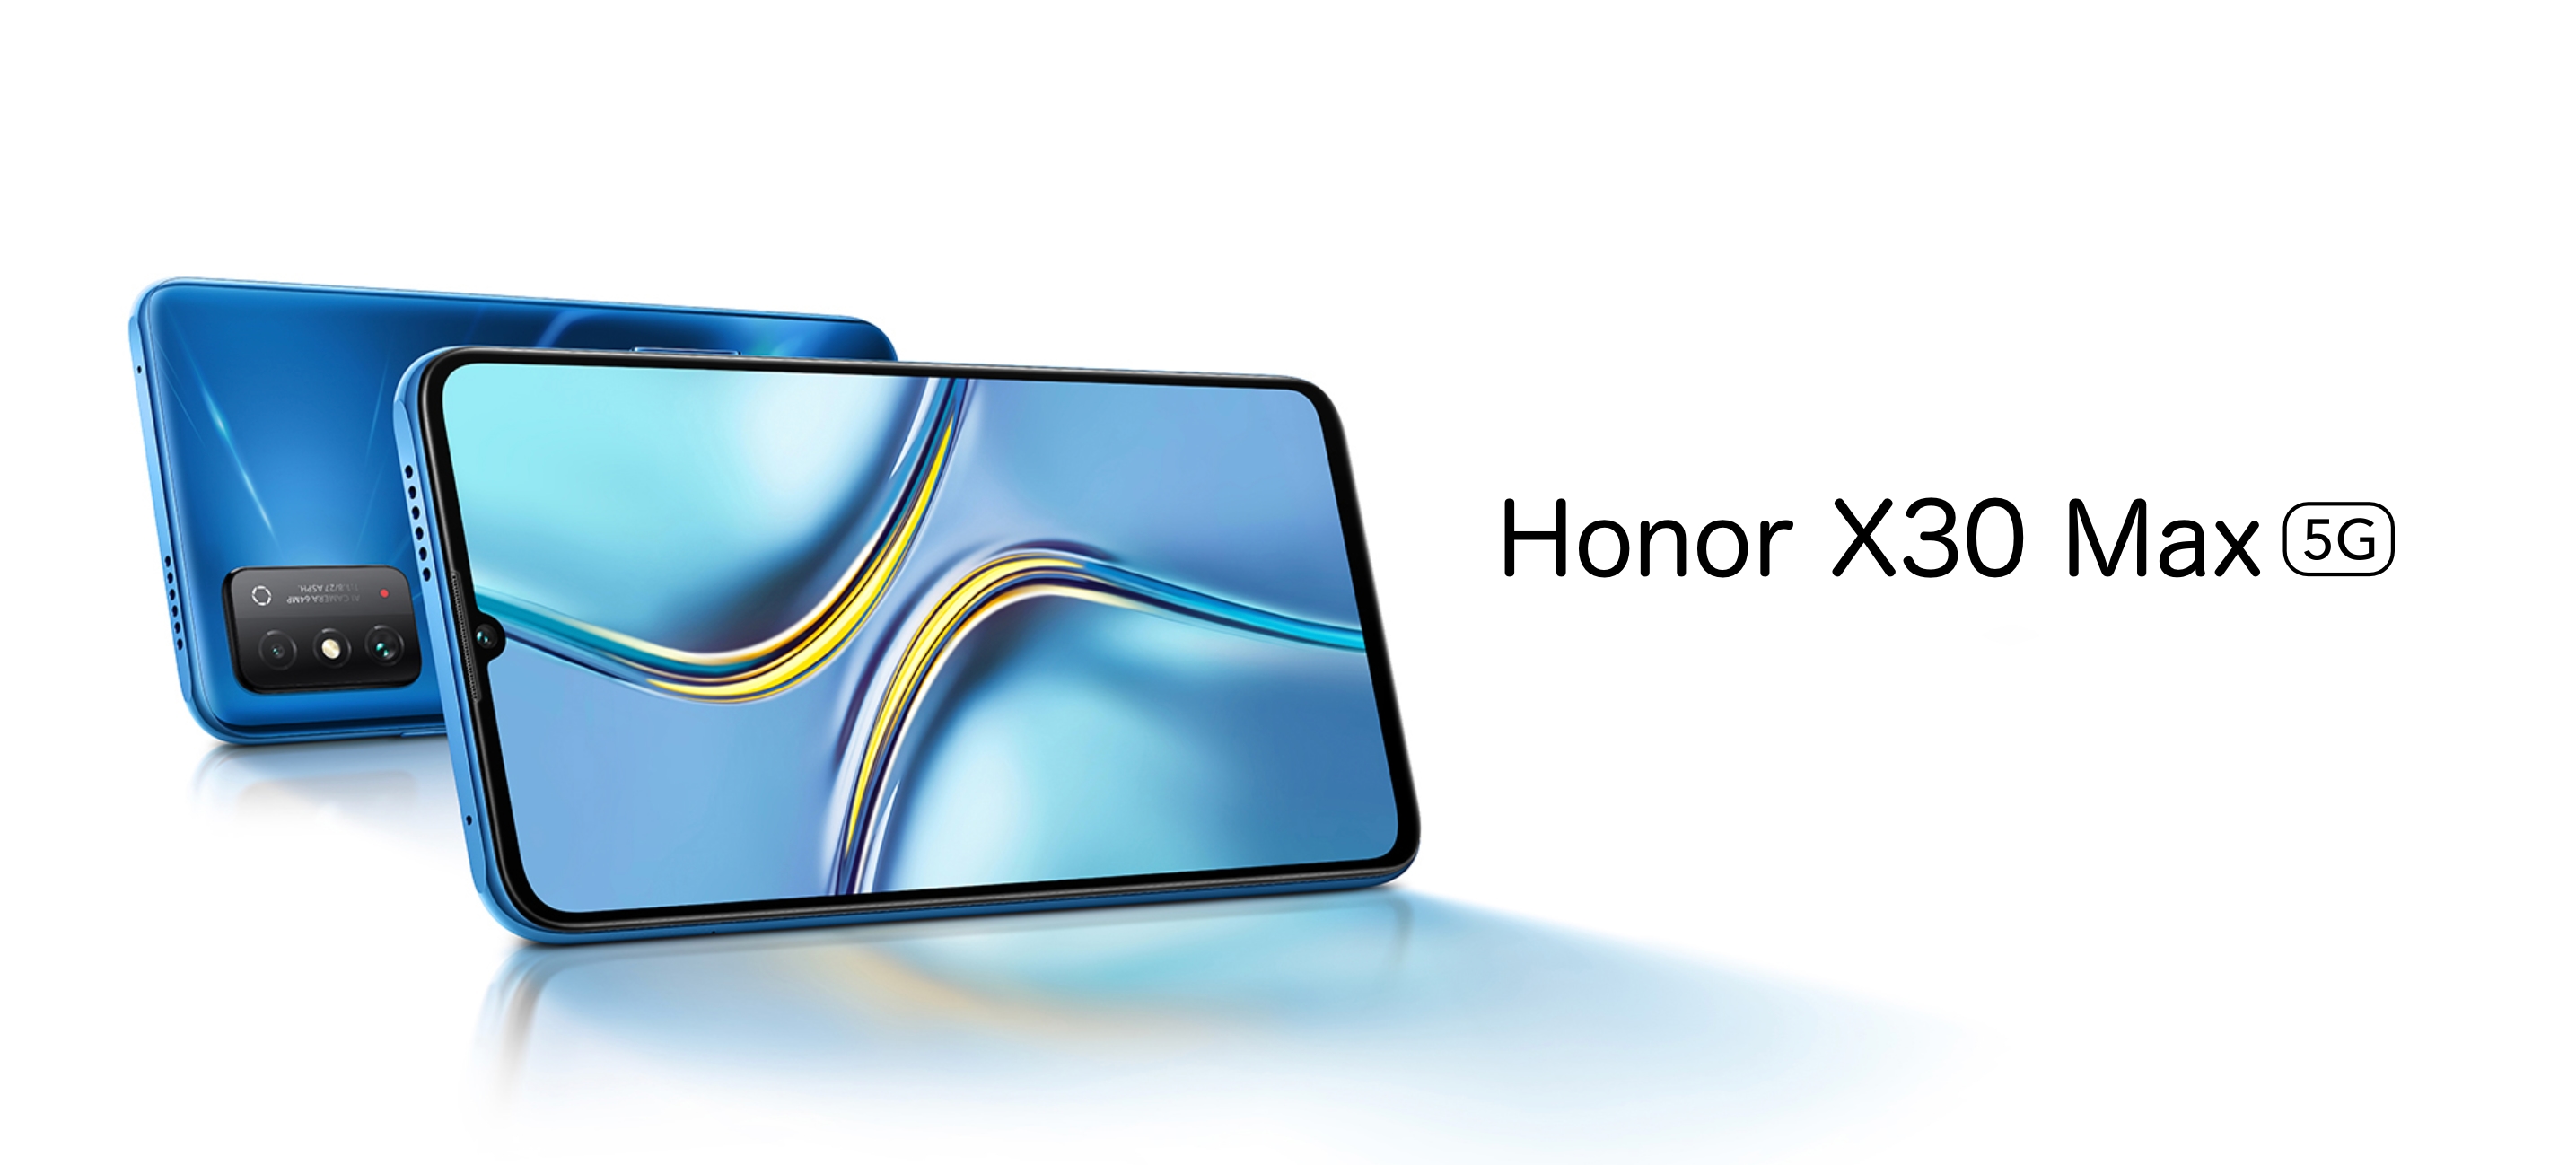 Honor X30 Max: smartphone with 7.09-inch screen and MediaTek Dimensity 900 chip for $375